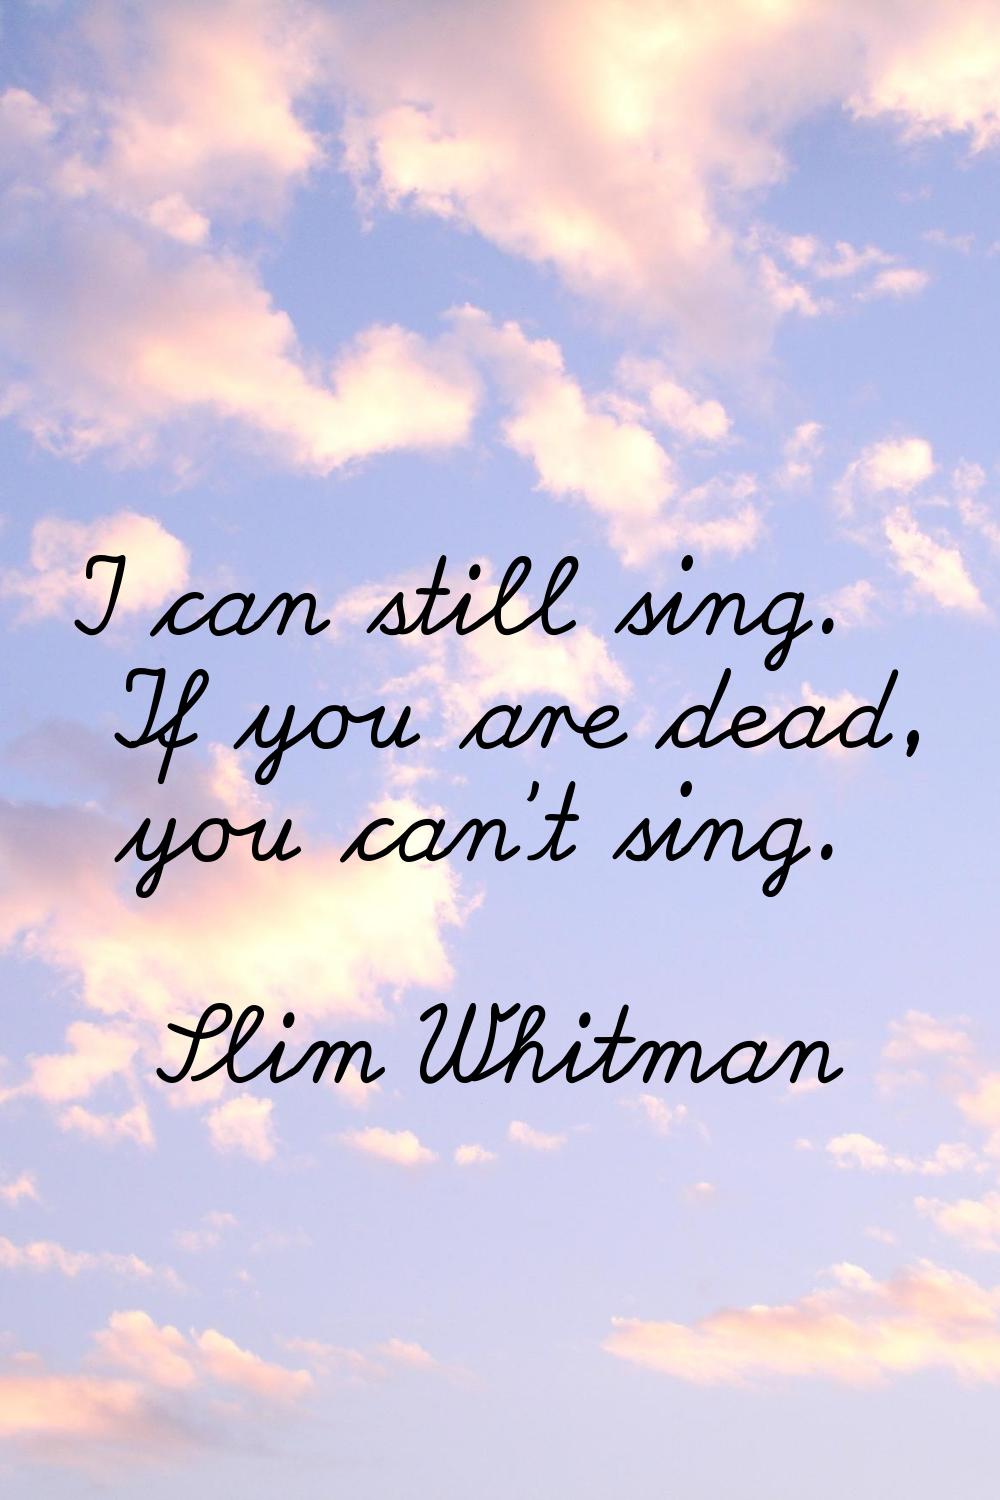 I can still sing. If you are dead, you can't sing.